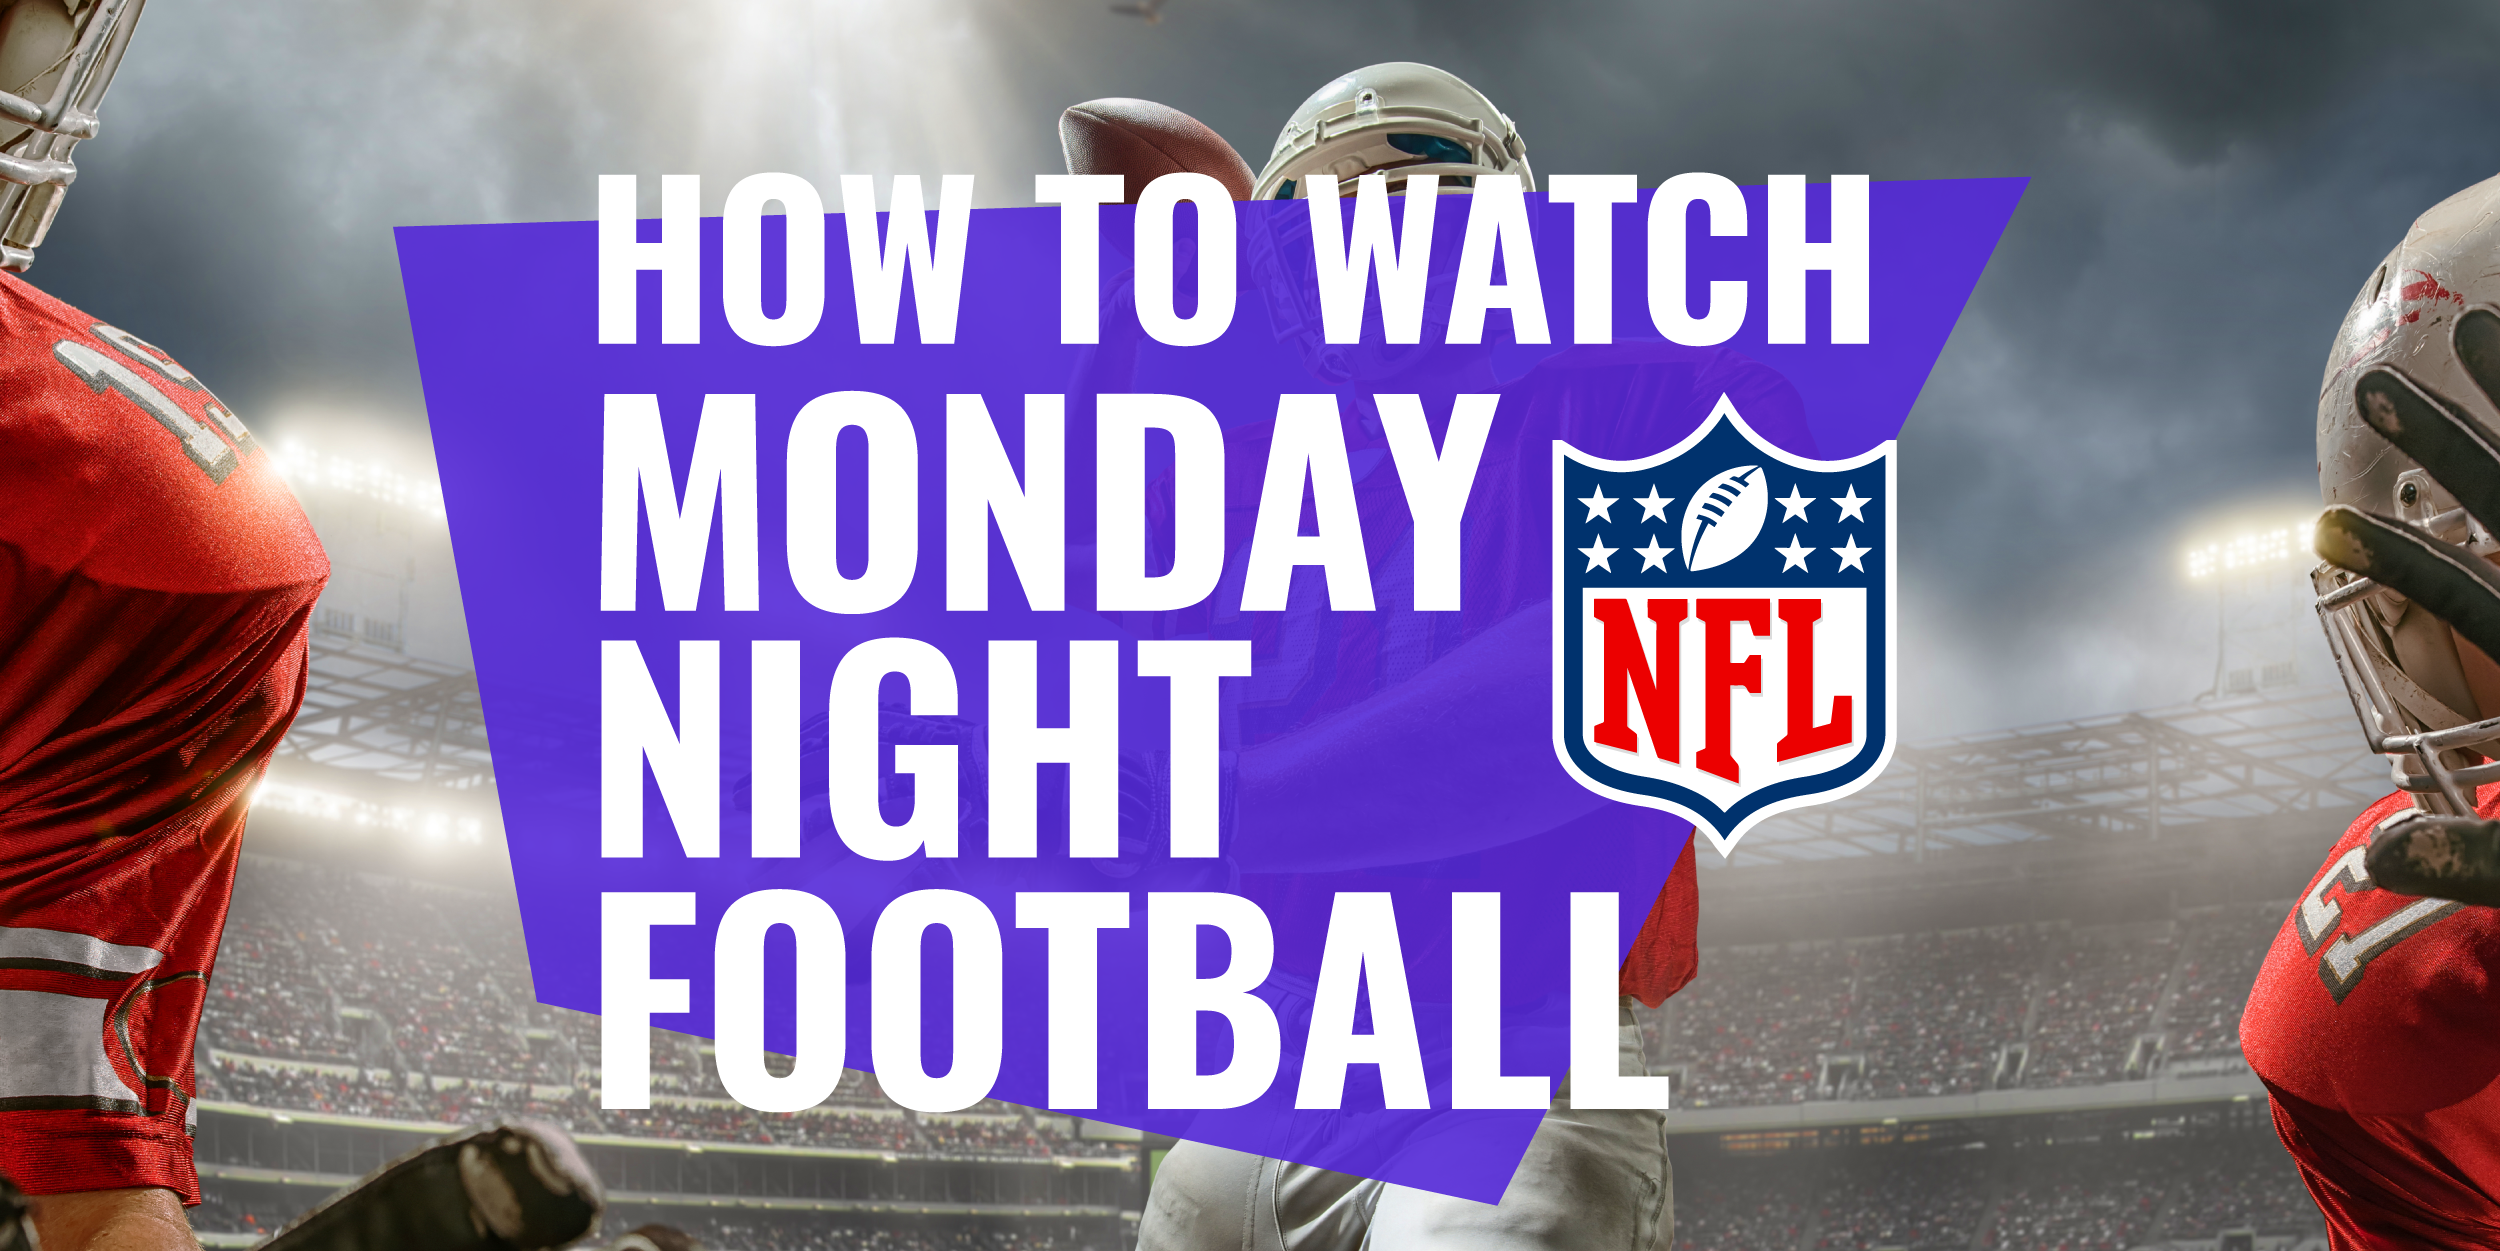 give me the monday night football game